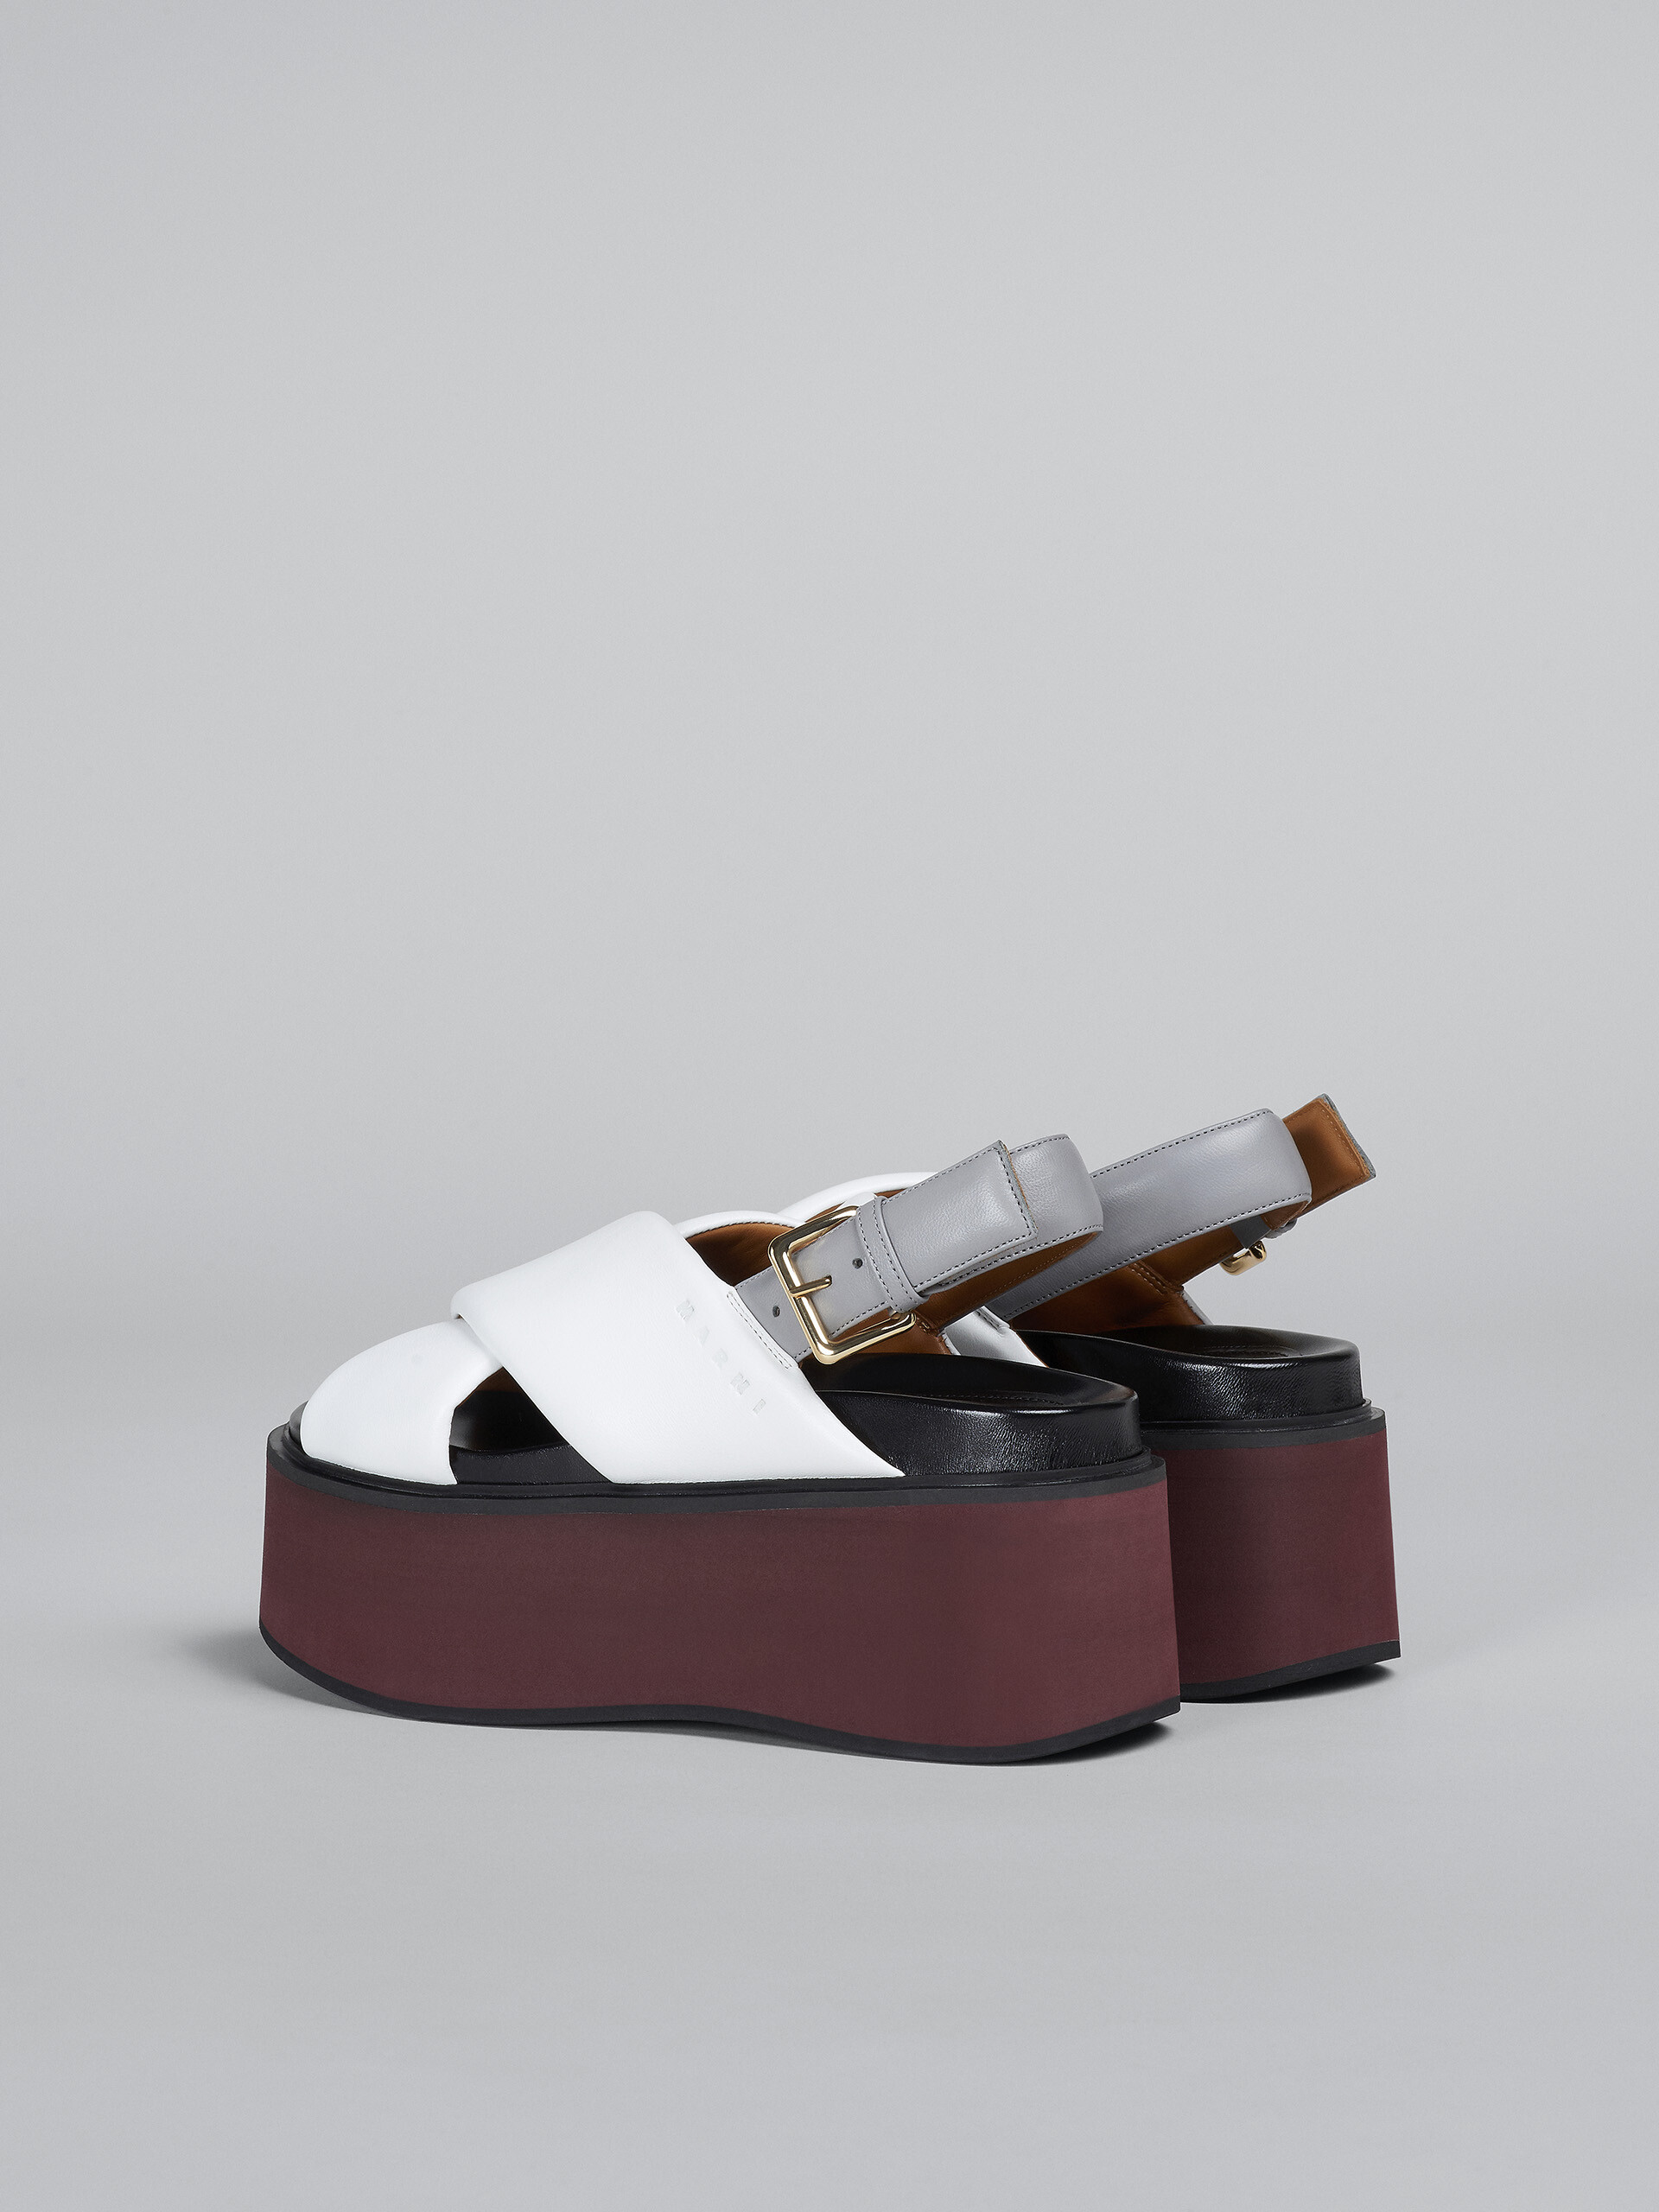 White and grey leather wedge - Sandals - Image 3